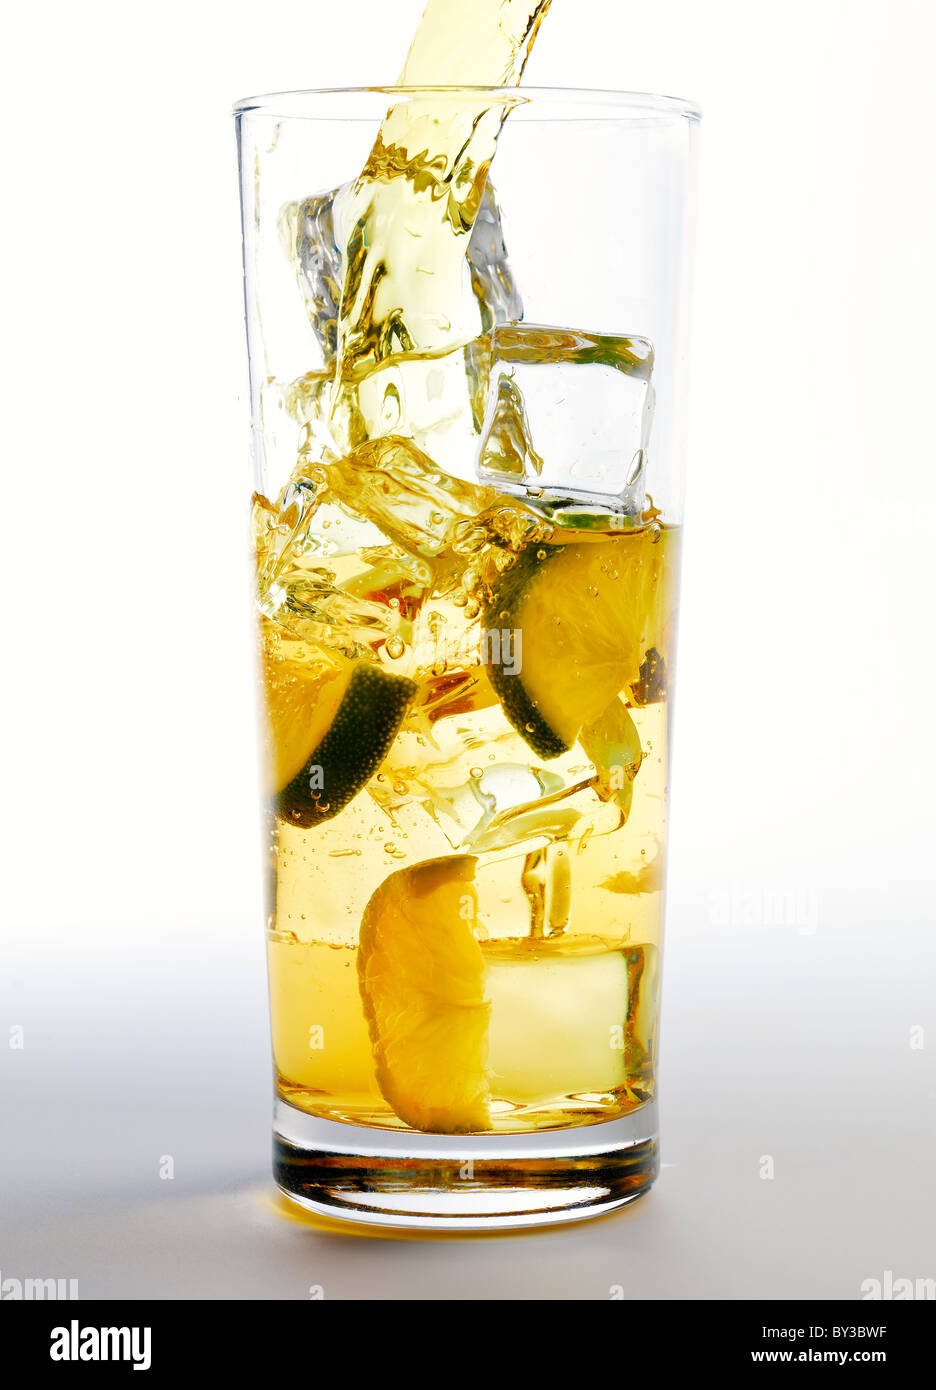 A fresh long drink (could be juice or alcoholic) being poured over ice and limes Stock Photo